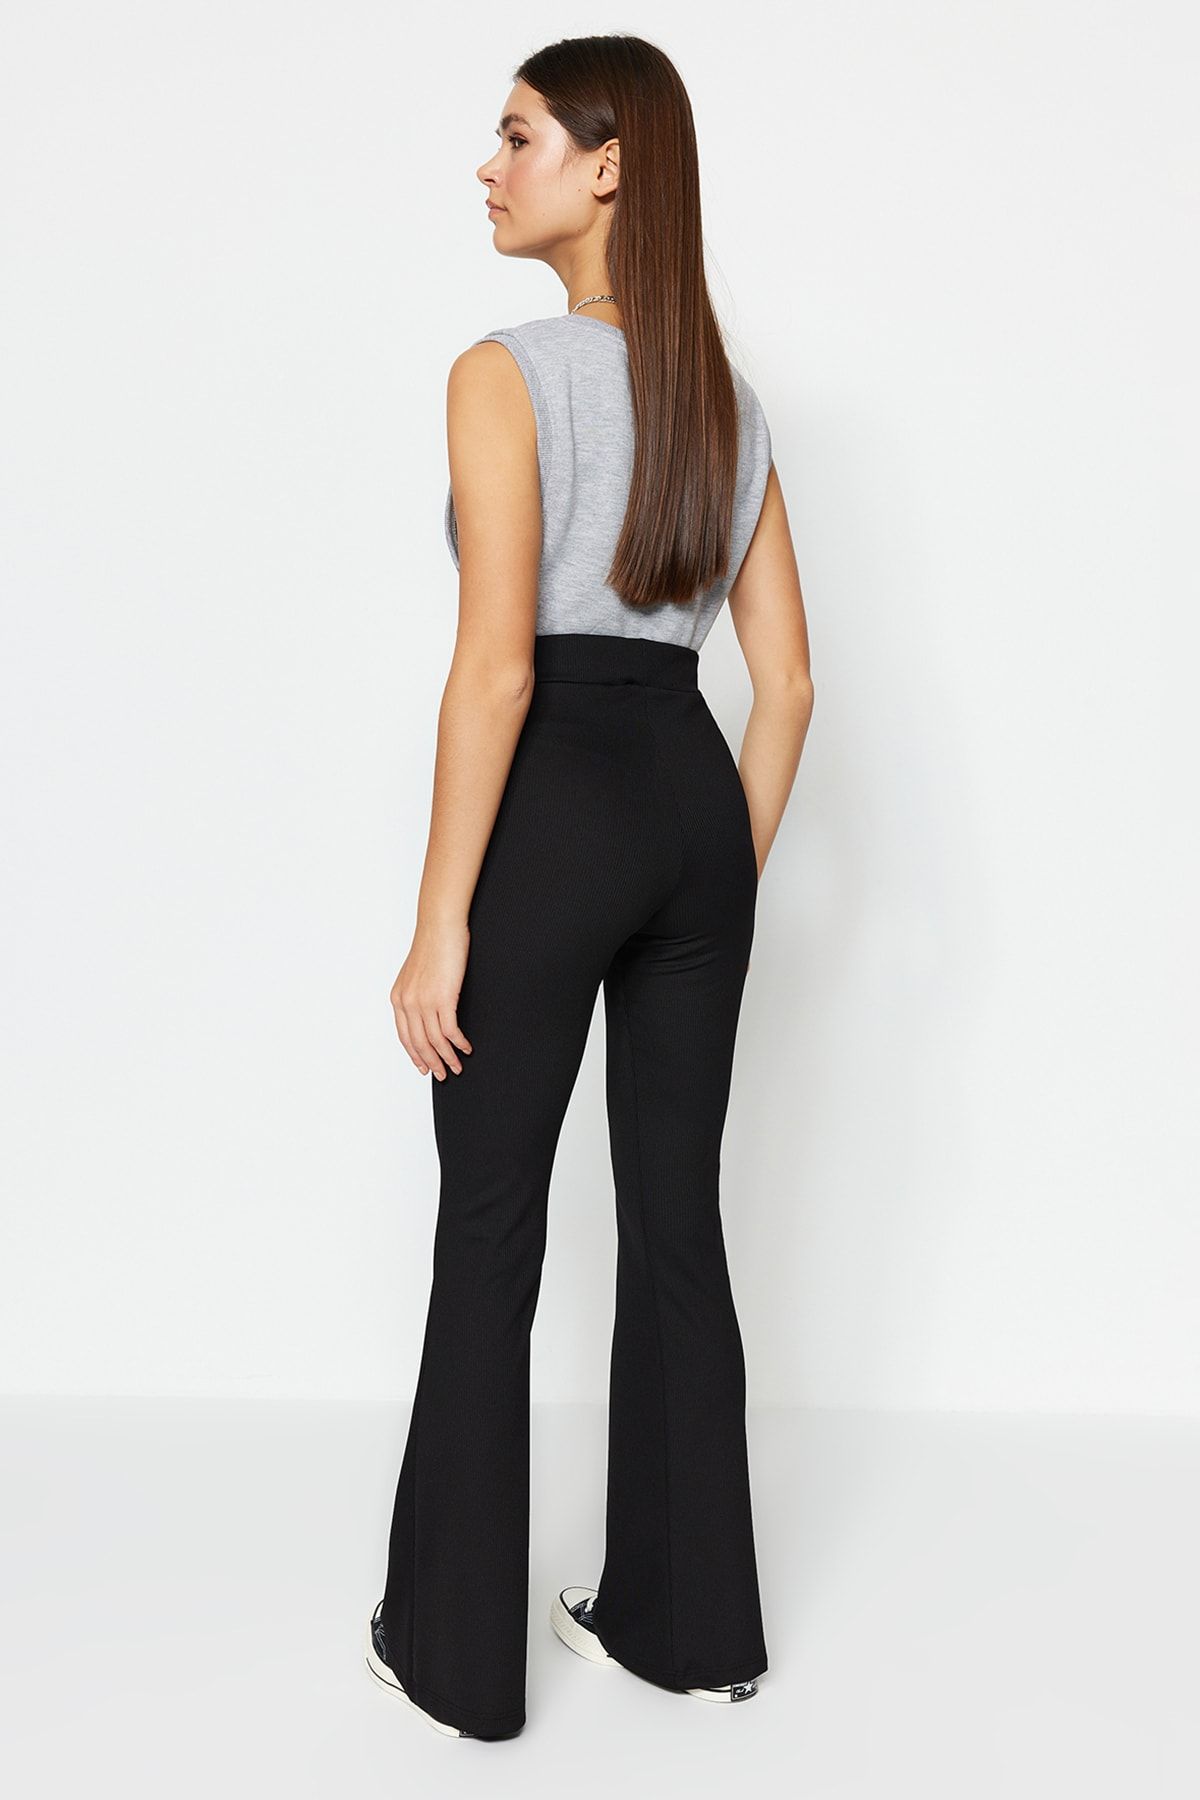 Trendyol Collection Black Ribbed Flare / Flare Leg High Waist